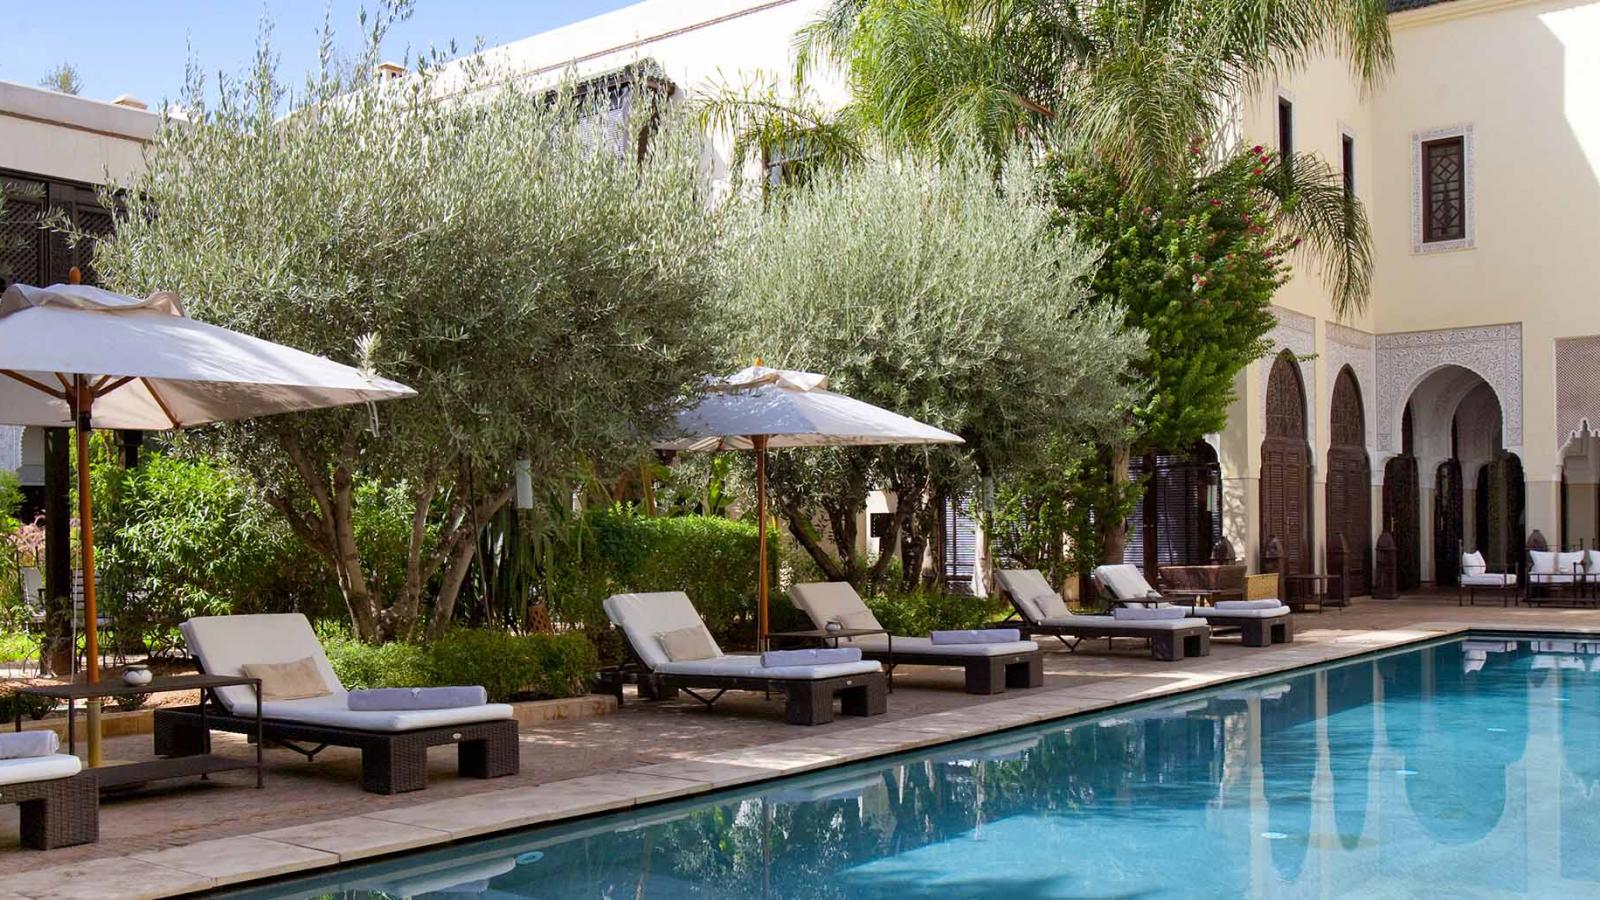 How we choose the best place for you to stay in Marrakech